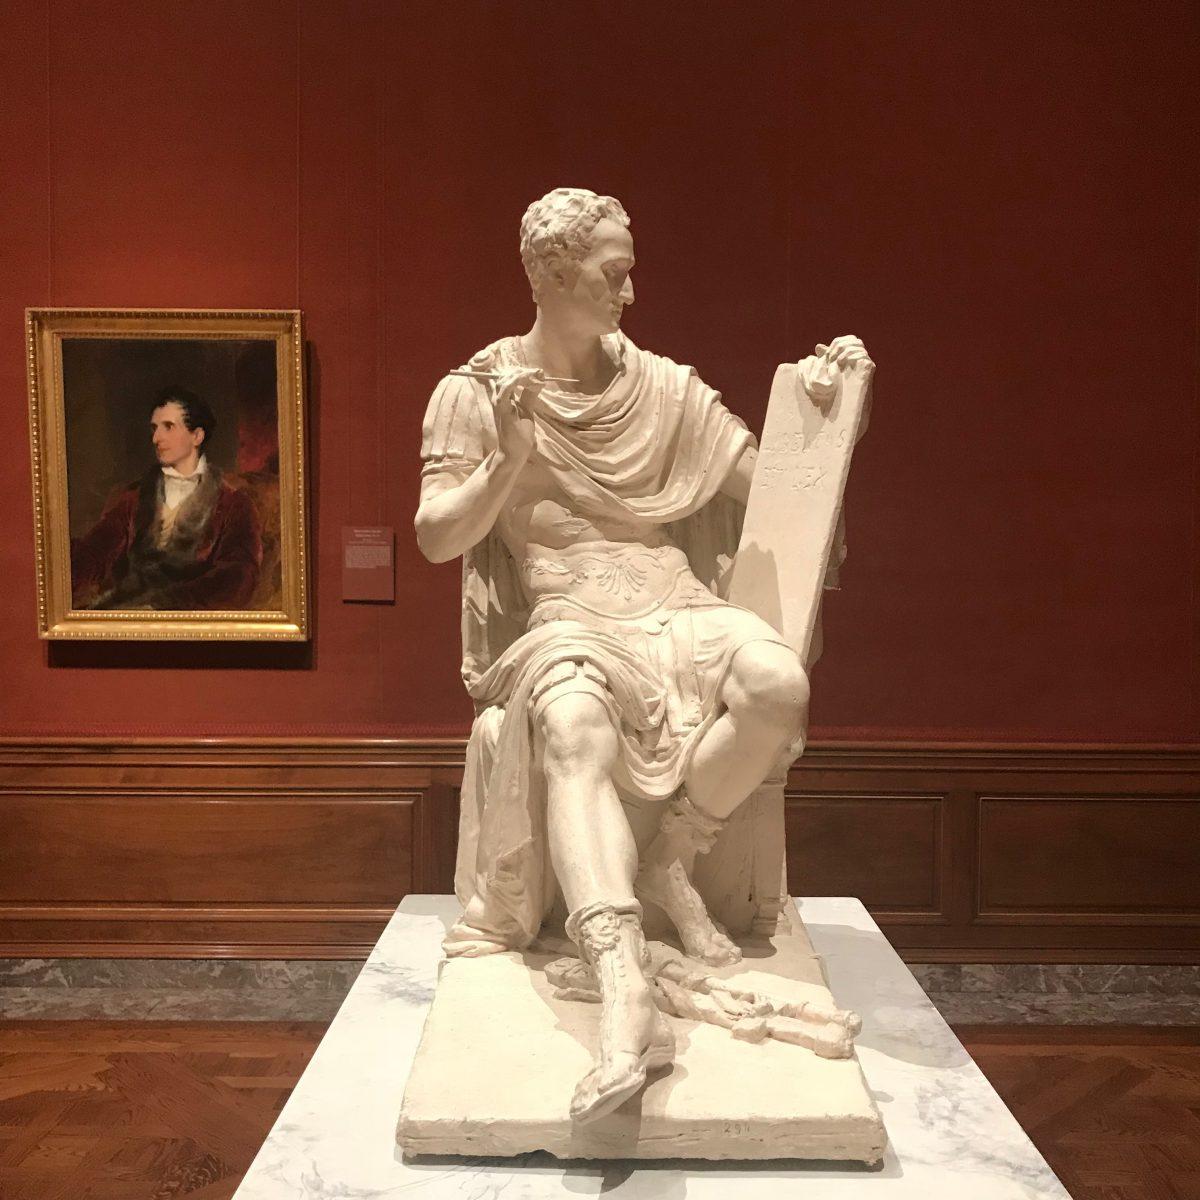 "Bozzetto (sketch) for George Washington," 1817, by Antonio Canova (1757–1822). Plaster, 31 1/2 inches by 18 1/8 inches by 25 9/16 inches, Gypsotheca e Museo Antonio Canova, in the exhibition at The Frick Collection on May 21, 2018. (Milene Fernandez/The Epoch Times)